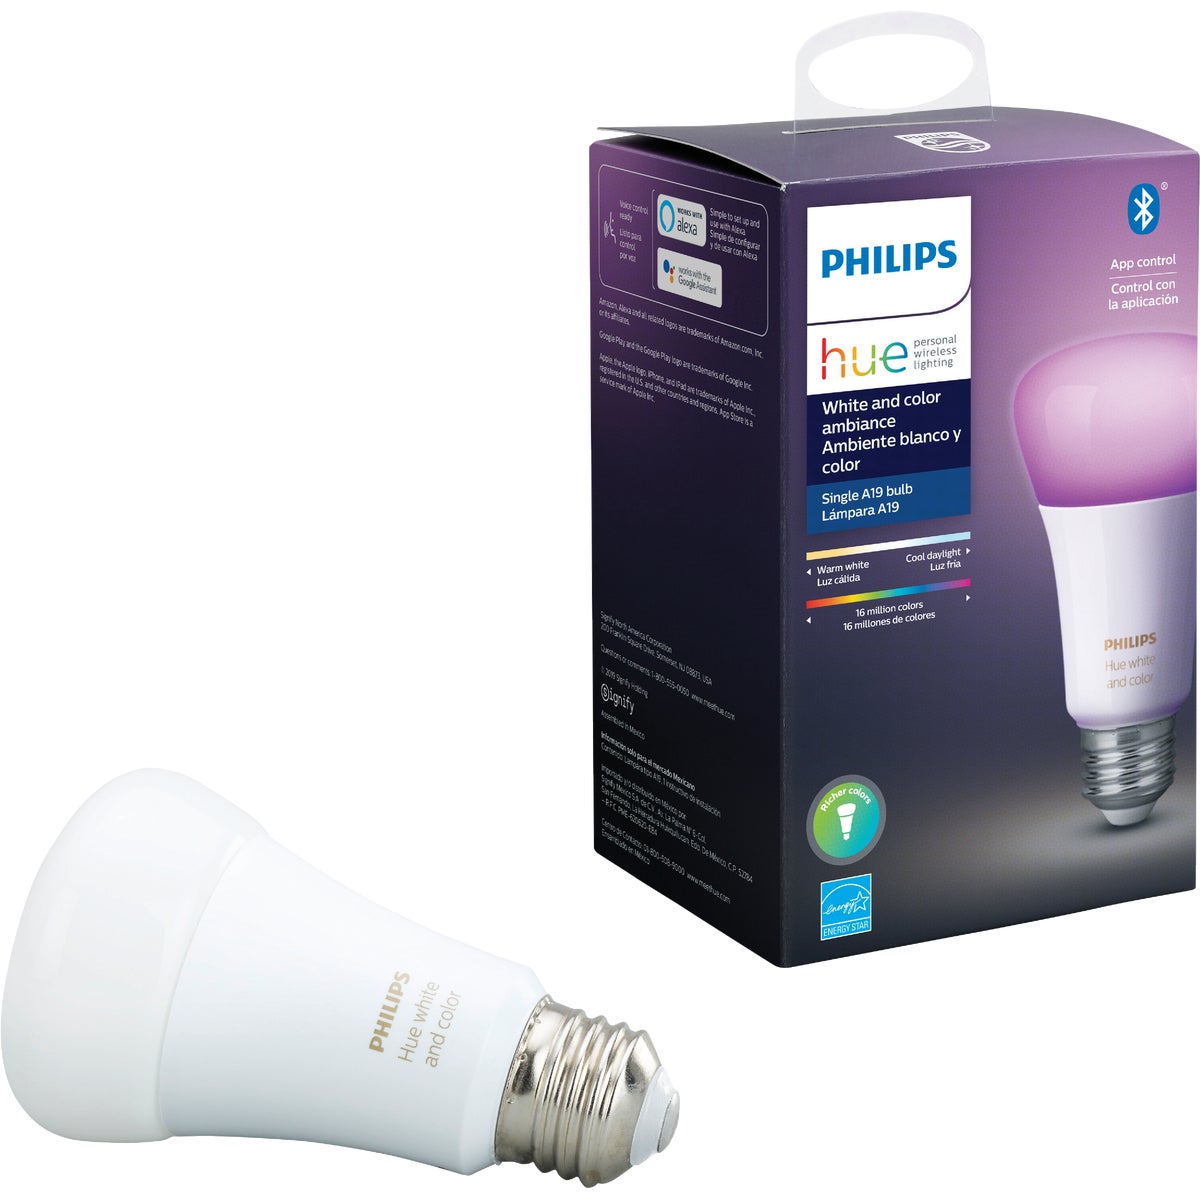 Philips Hue White & Color Ambiance 60W Equivalent Medium A19 Dimmable LED Light Bulb